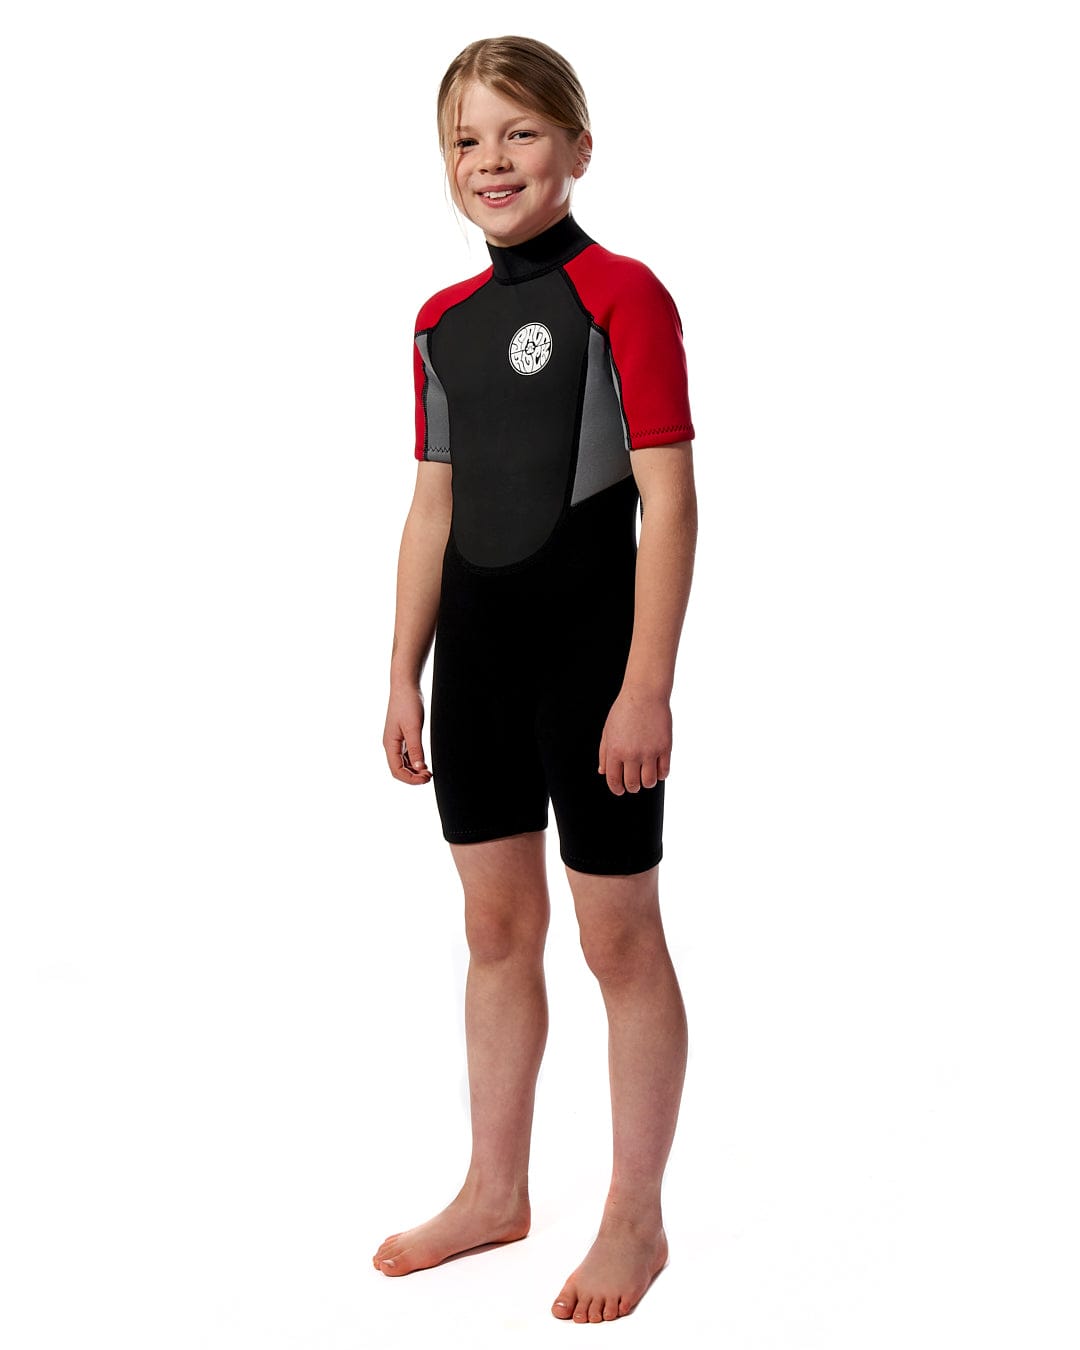 Young boy wearing a Saltrock Core - Boys 3/2 Shortie Wetsuit in Black/Red, standing and smiling against a white background.